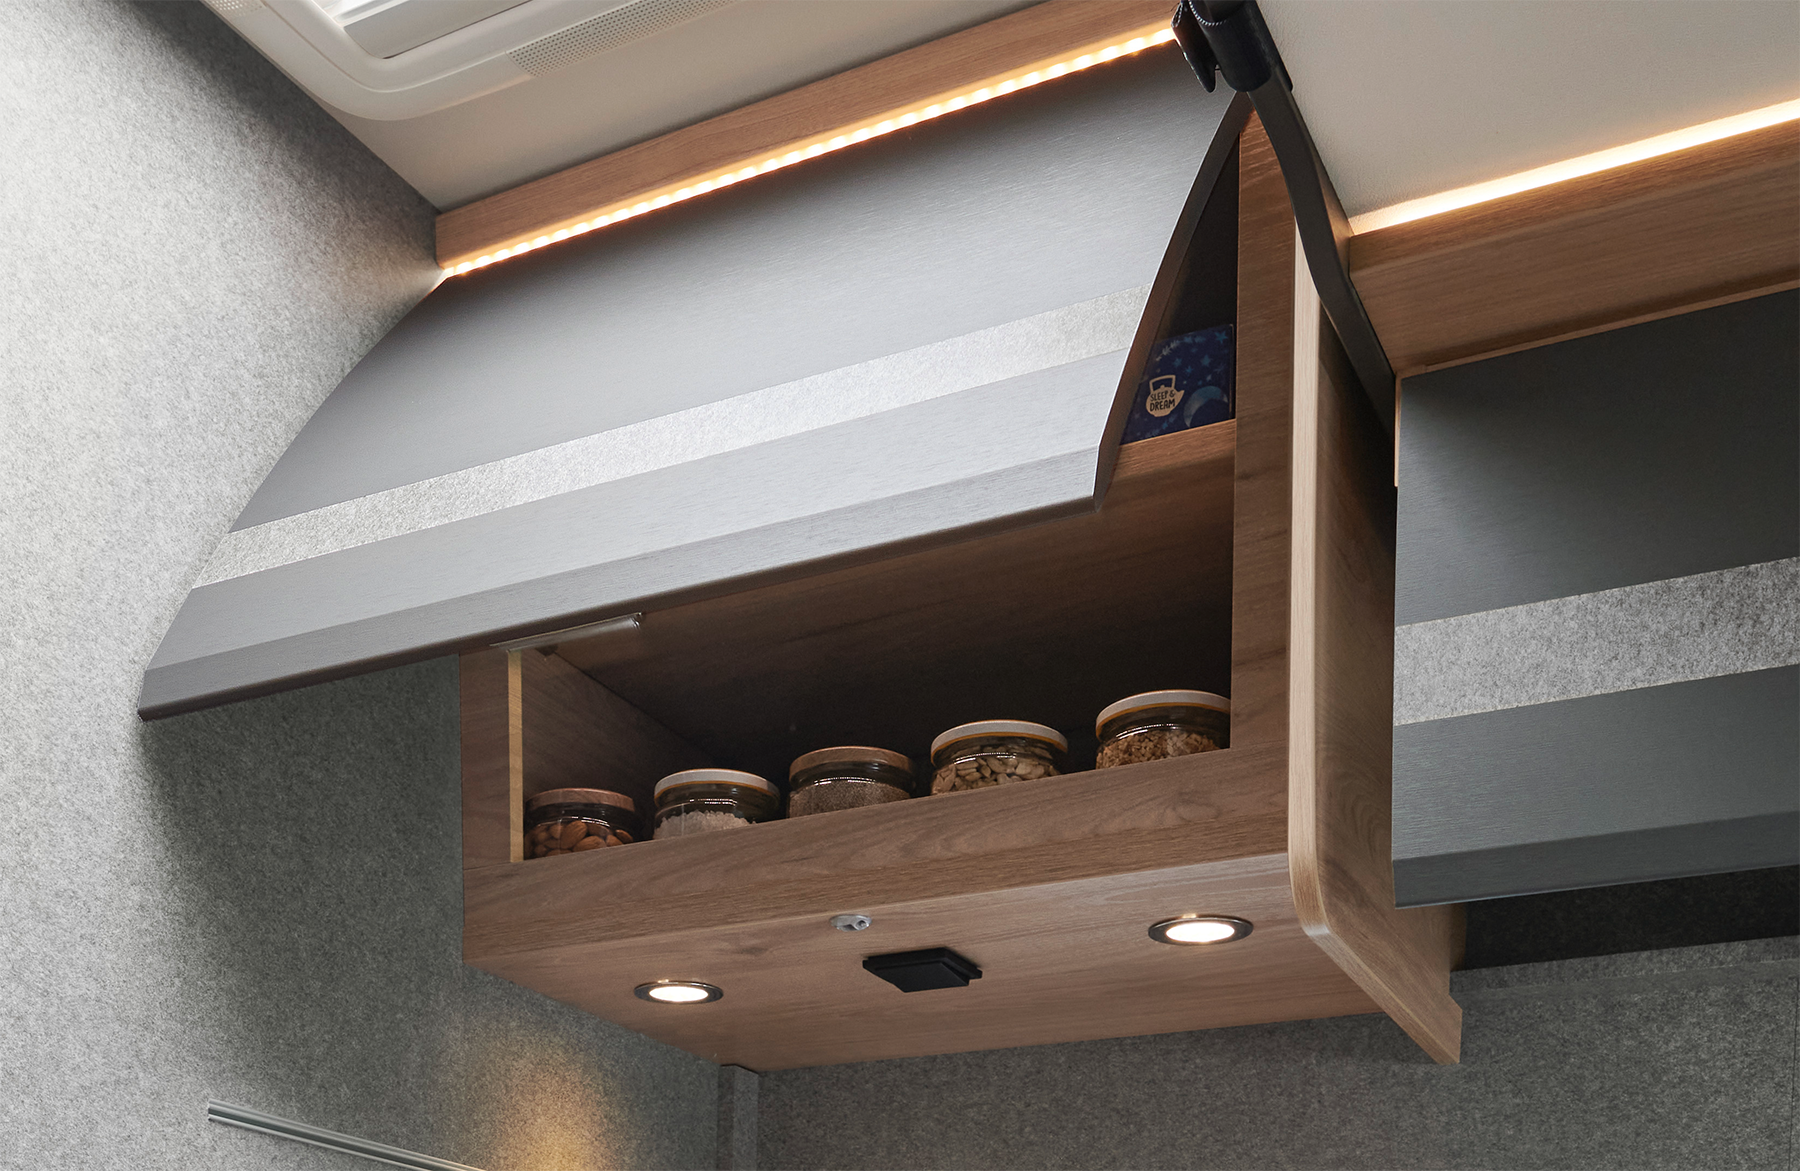 The overhead lockers are equipped with a soft- close function and are indirectly illuminated.